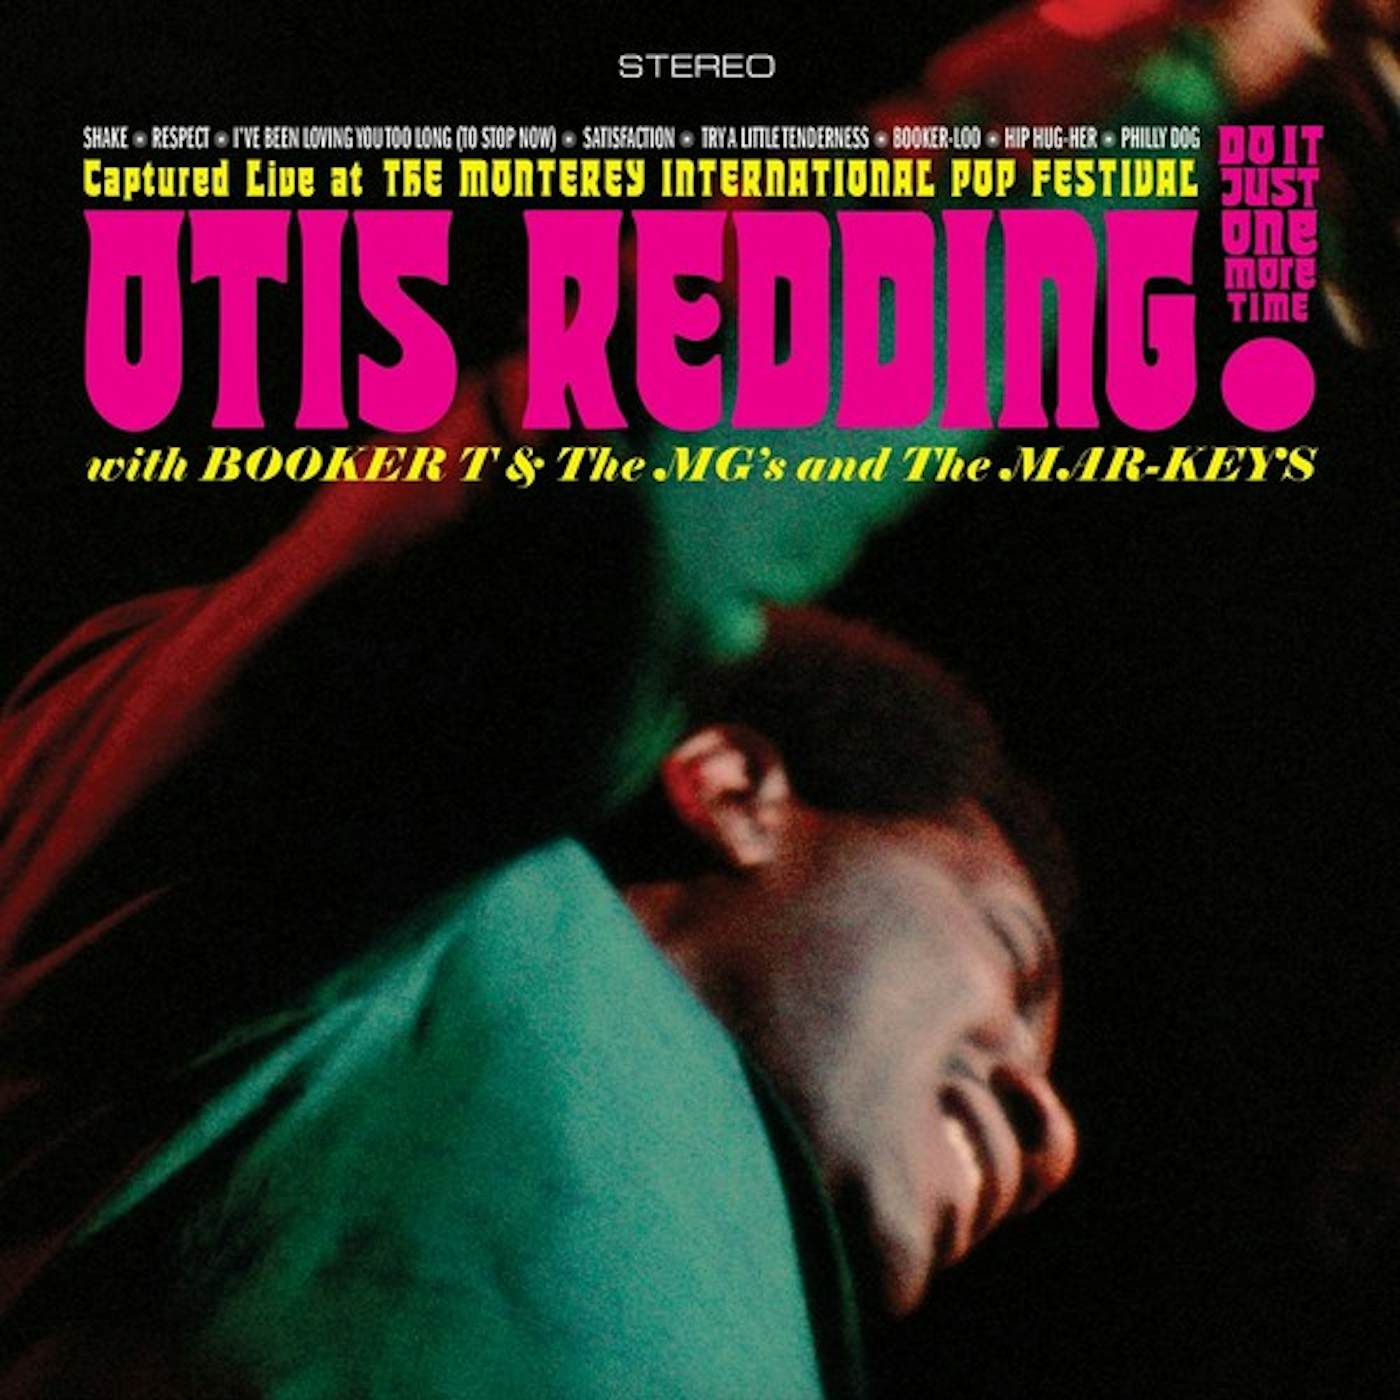 Just Do It One More Time! Otis Redding With Booker T & The MGs And The Mar Keys Captured Live At The Monterey International Pop Festival Vinyl Record